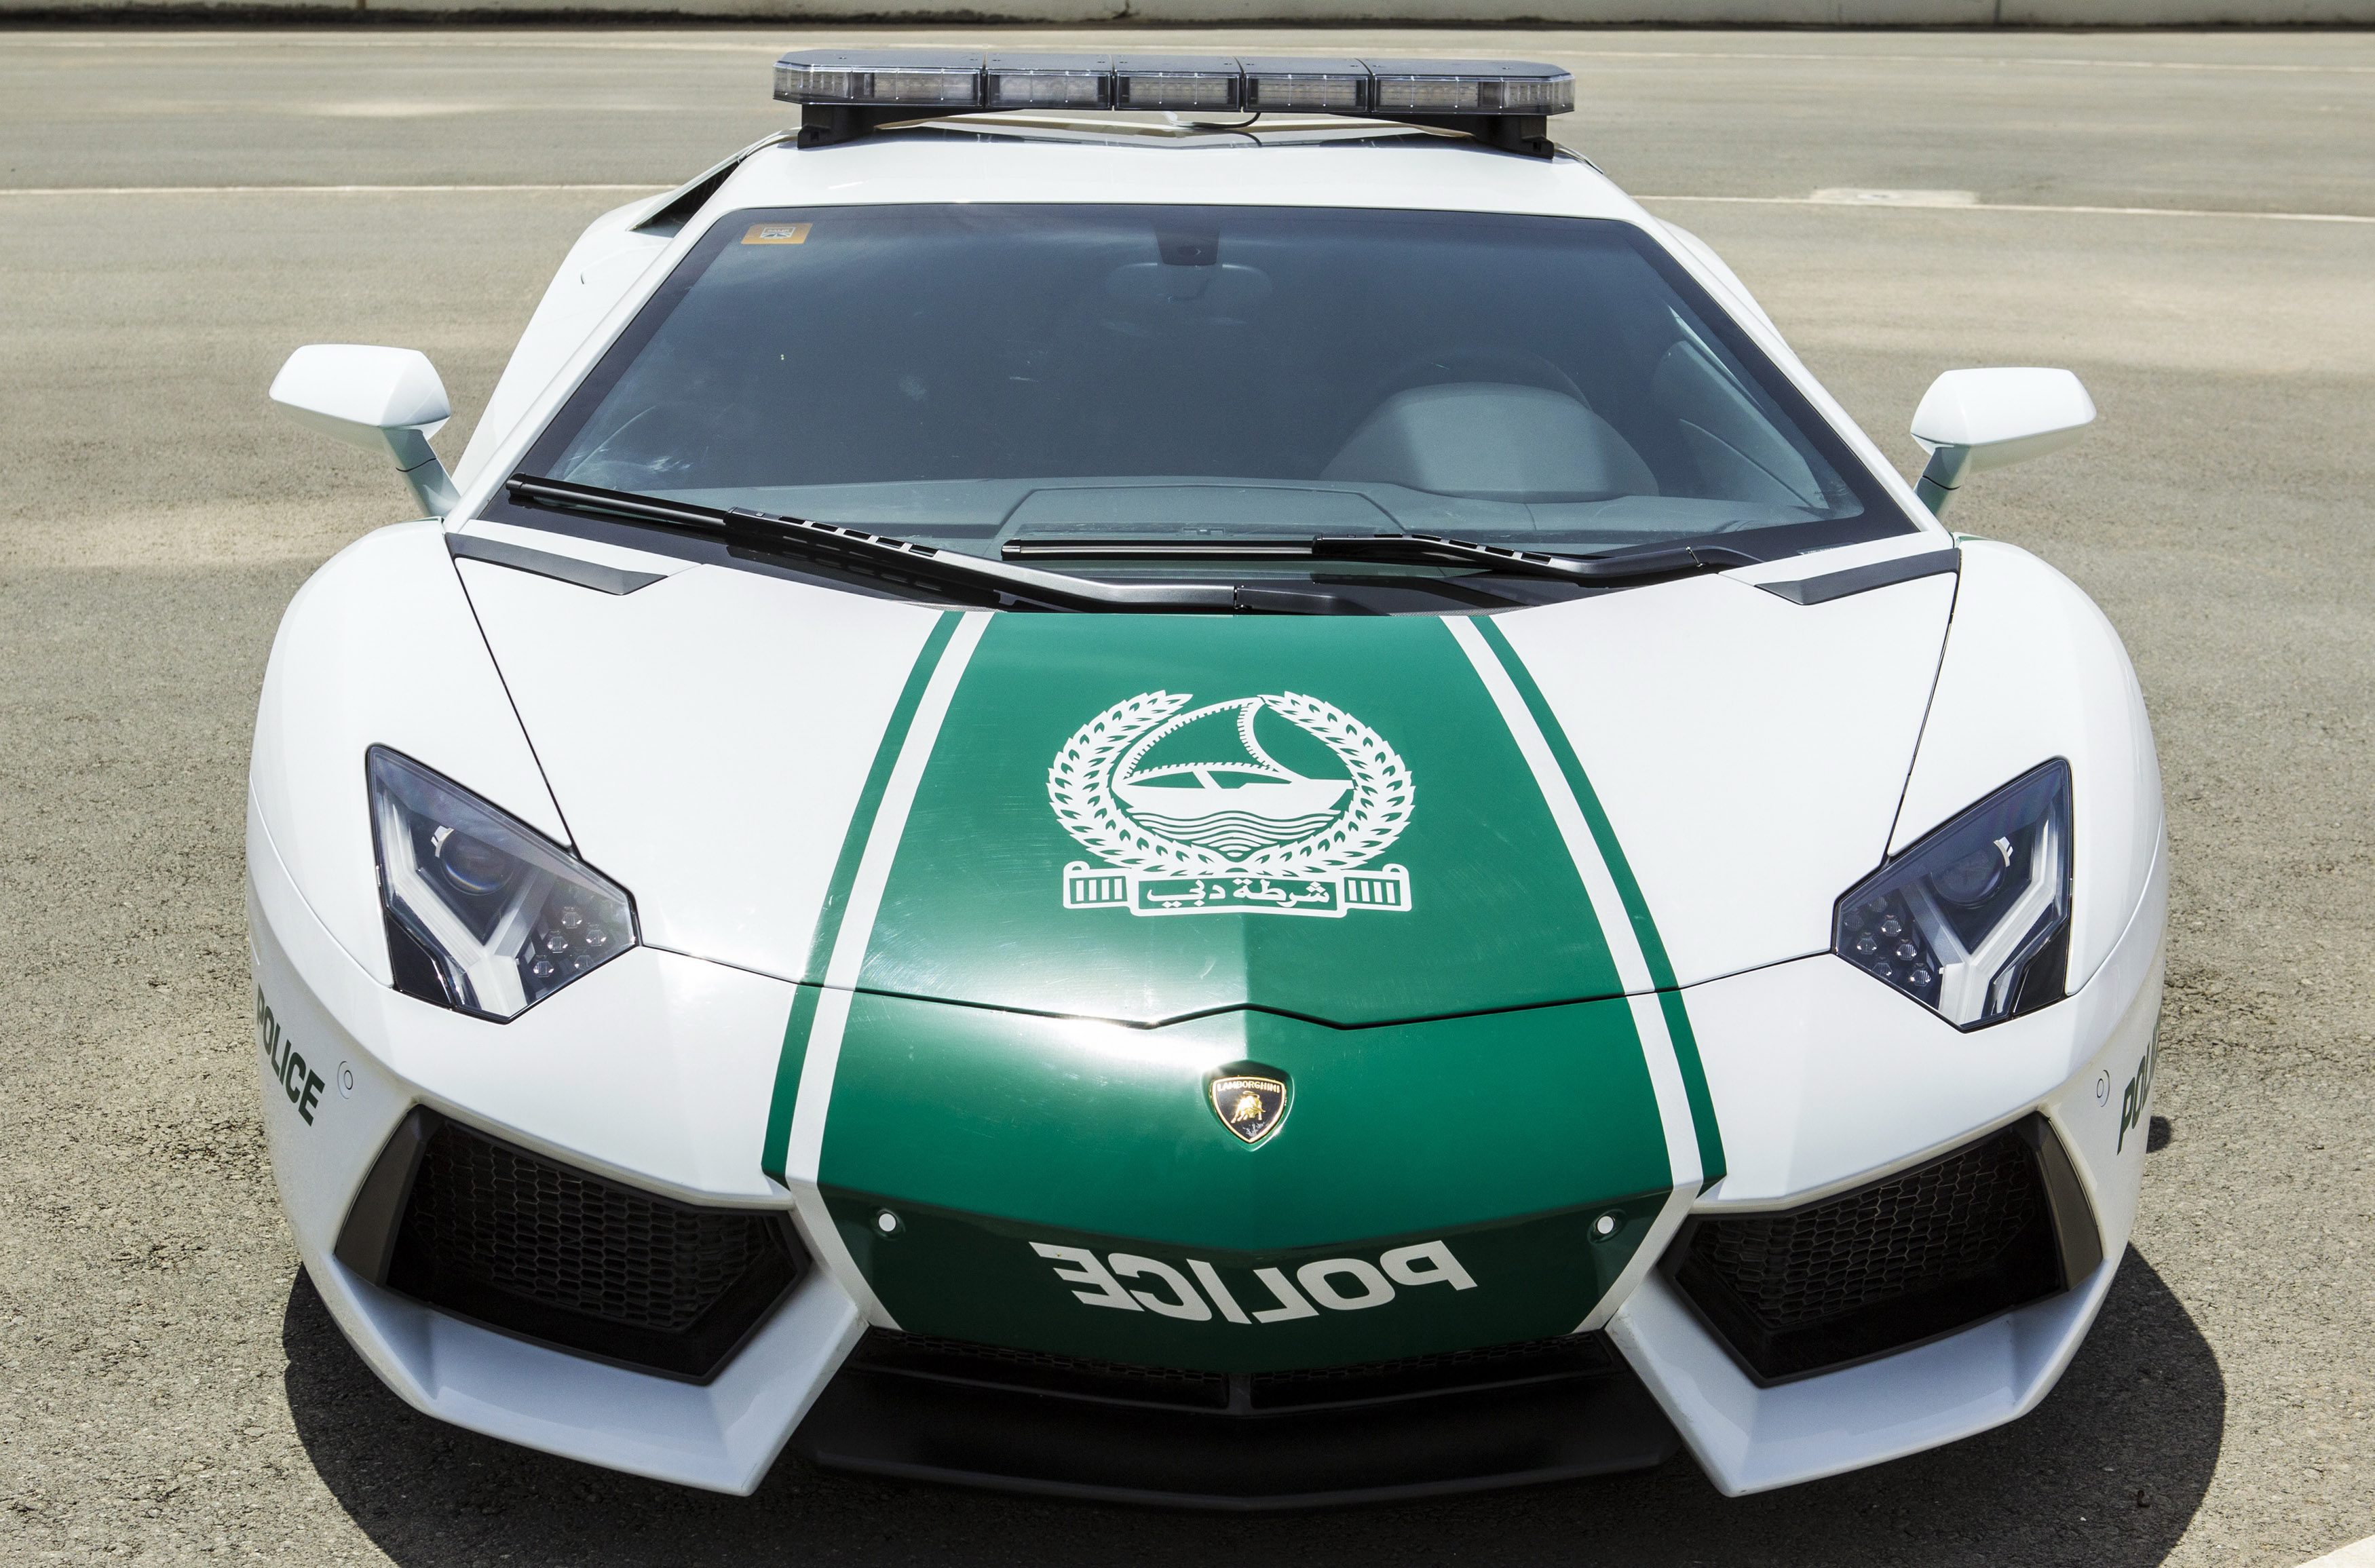 A handout picture released by Dubai Police Office shows the new Lamborghini Aventador which is used by Dubai Police Department, in Dubai, United Arab Emirates, 11 April 2013. Dubai Police announced on 11 April they added the Italian-made sports car to their police vehicles, apparently to boost their ability in high-speed chases. The 420,000 euros car can reach a speed of up to 349km/h.